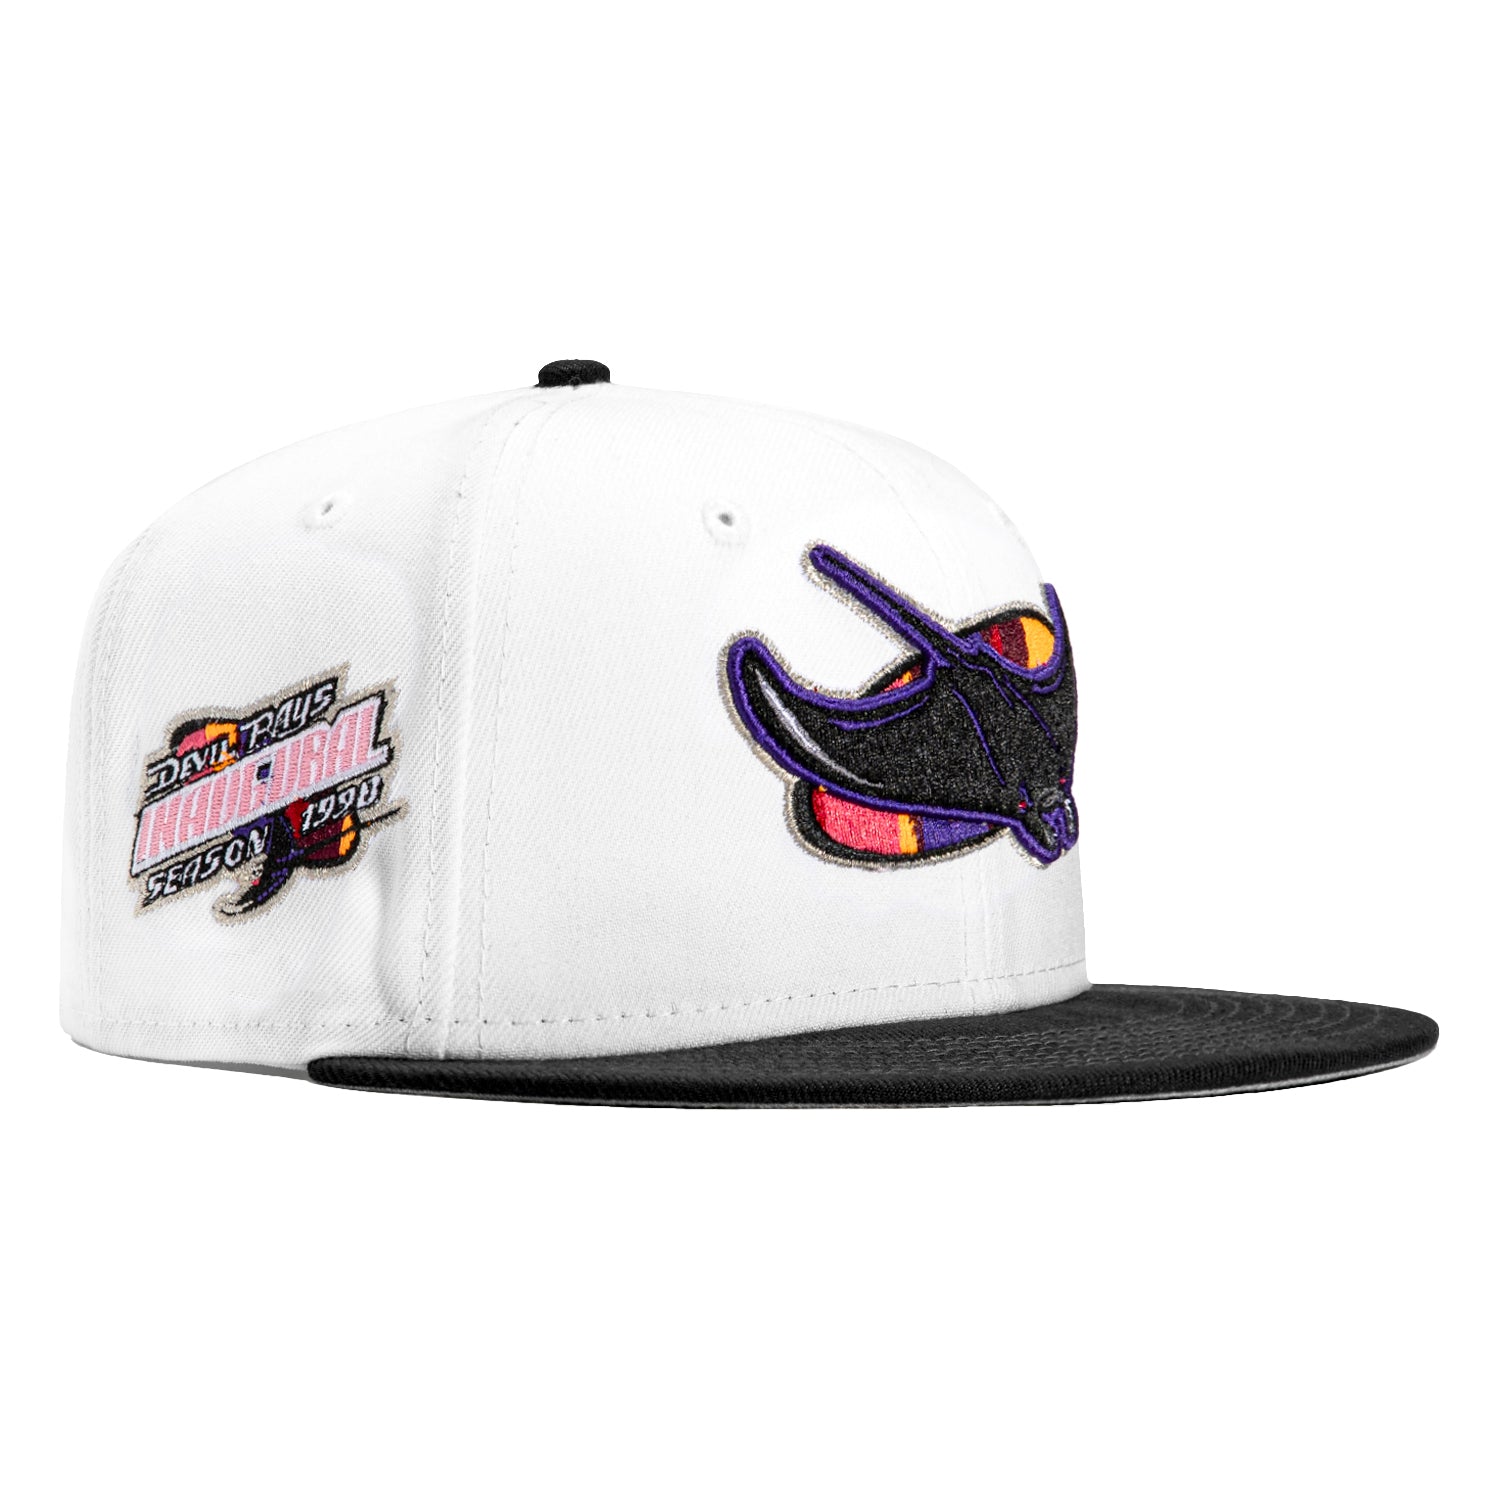 Tampa Bay Raptors Gifts & Merchandise for Sale